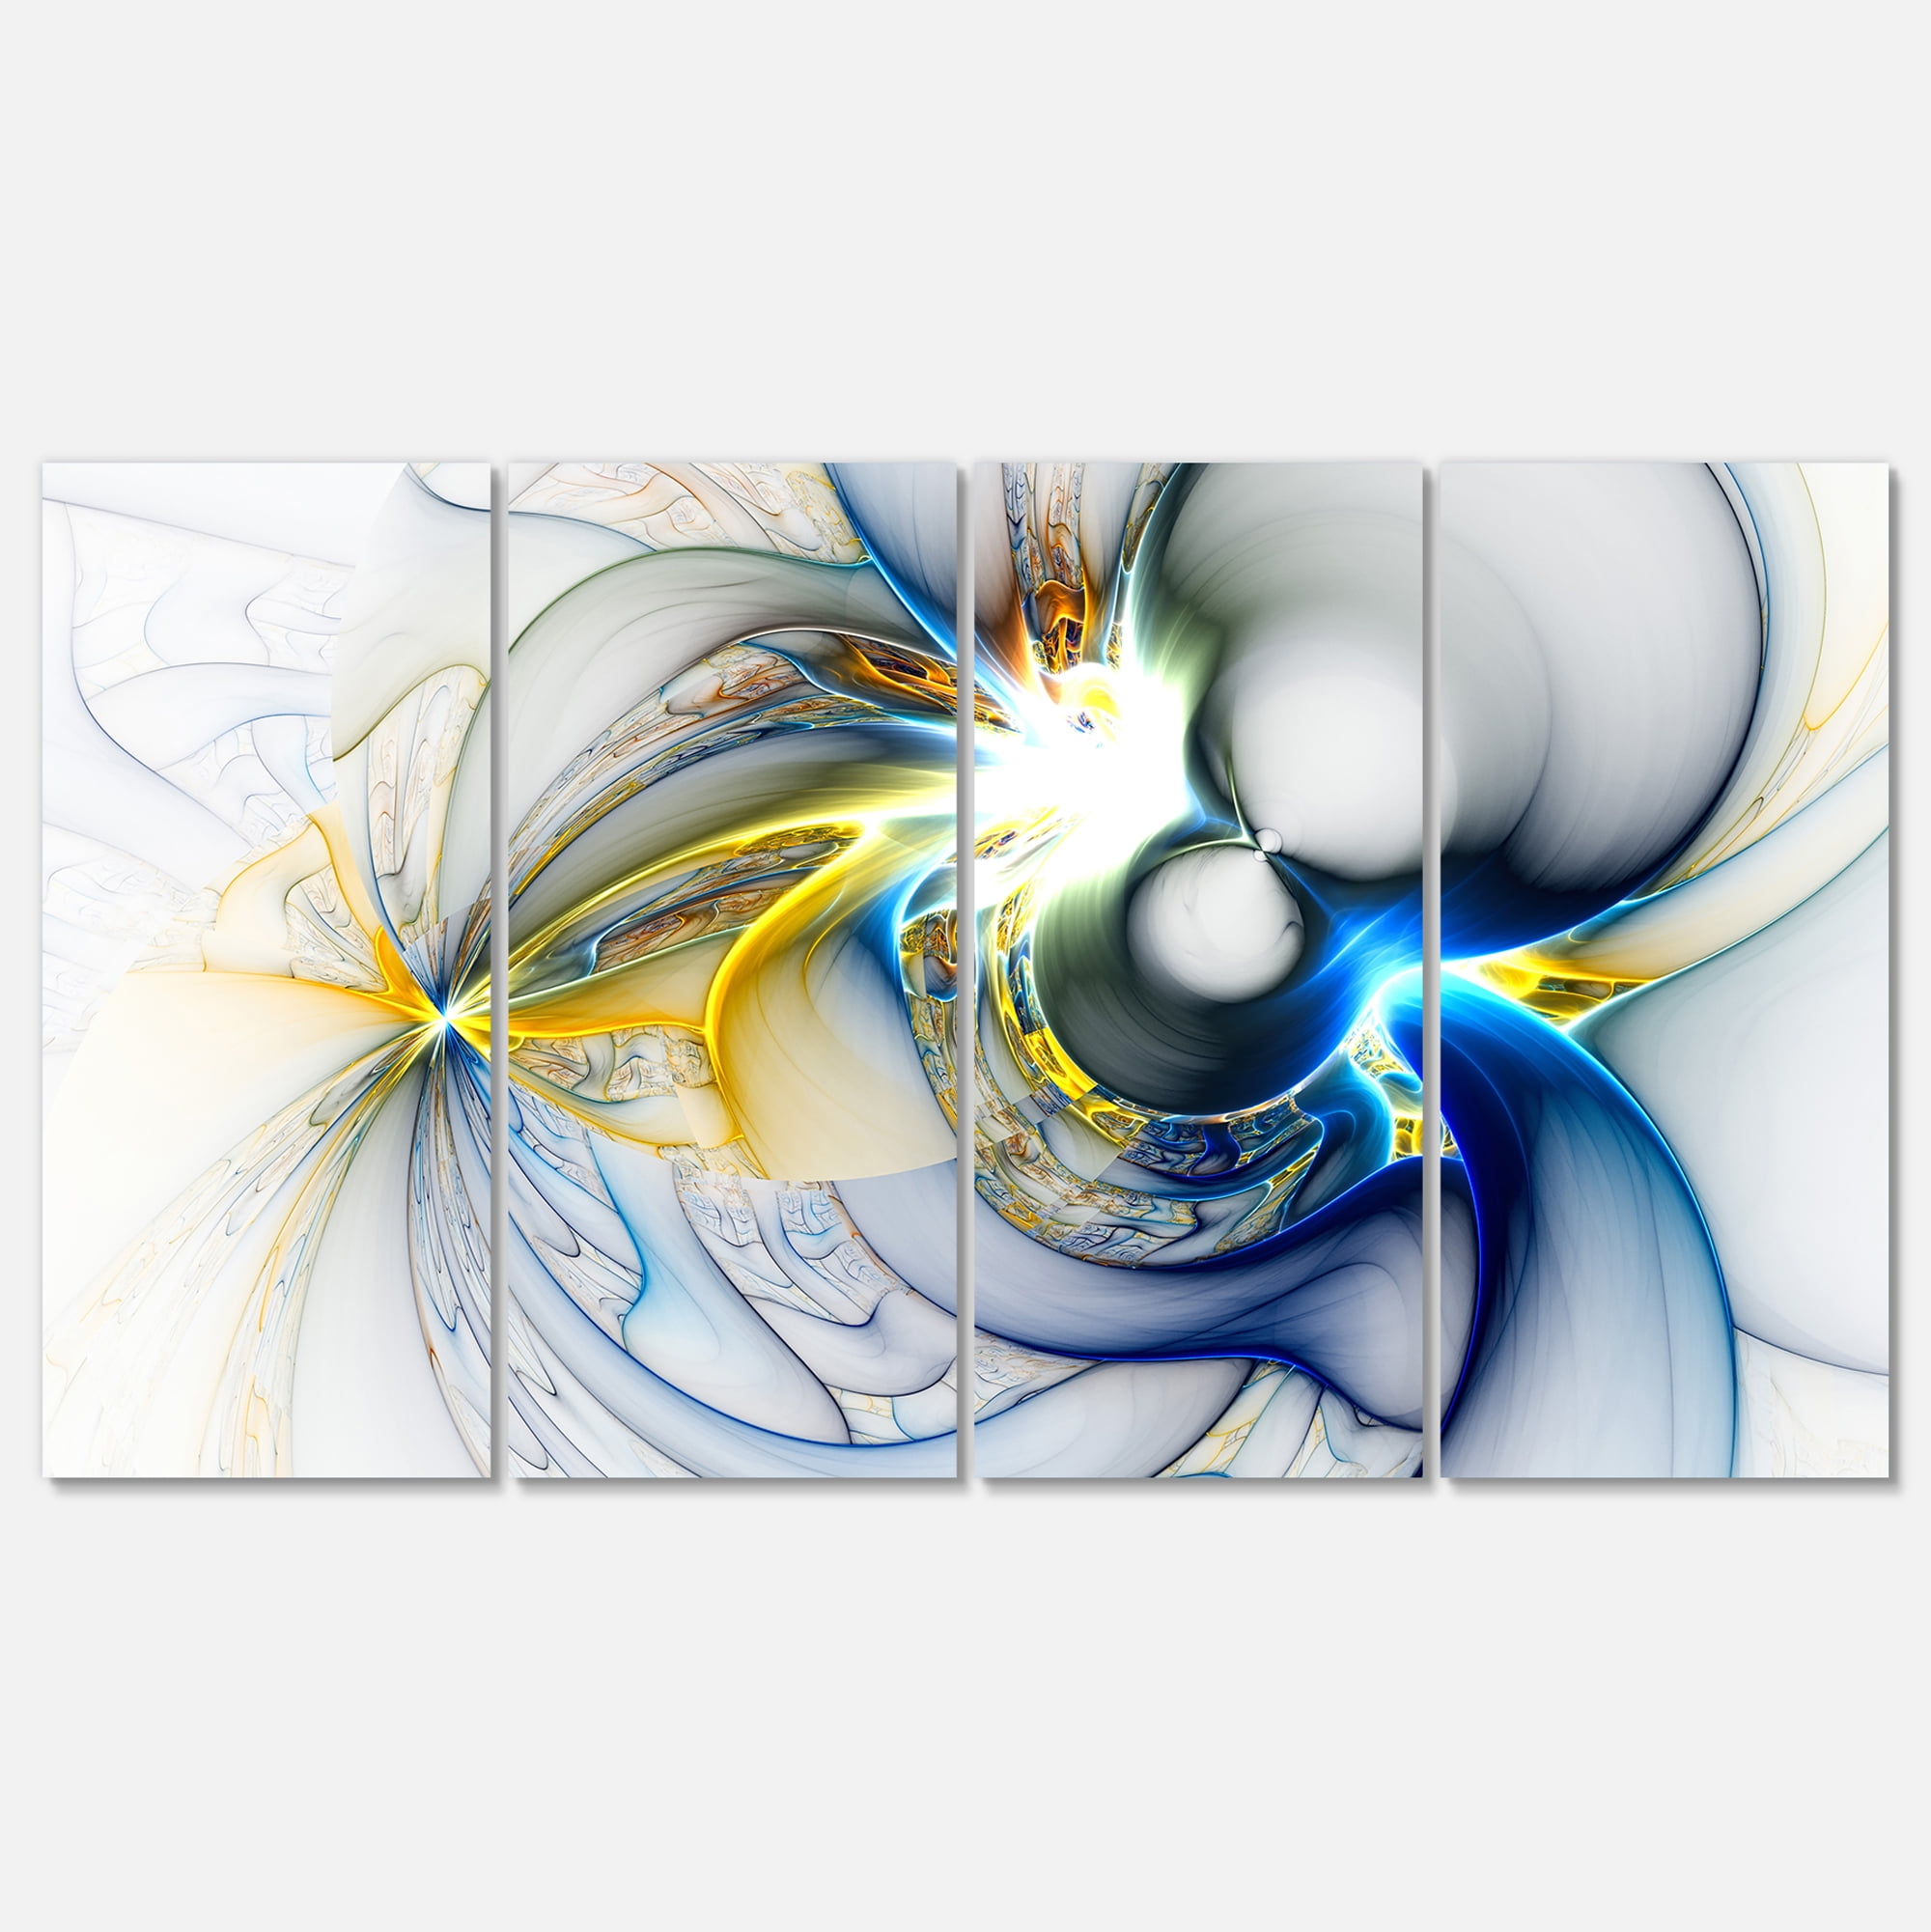 3D Colorful Abstract CANVAS PRINT Home Wall Art Decor Giclee 4 Sizes 